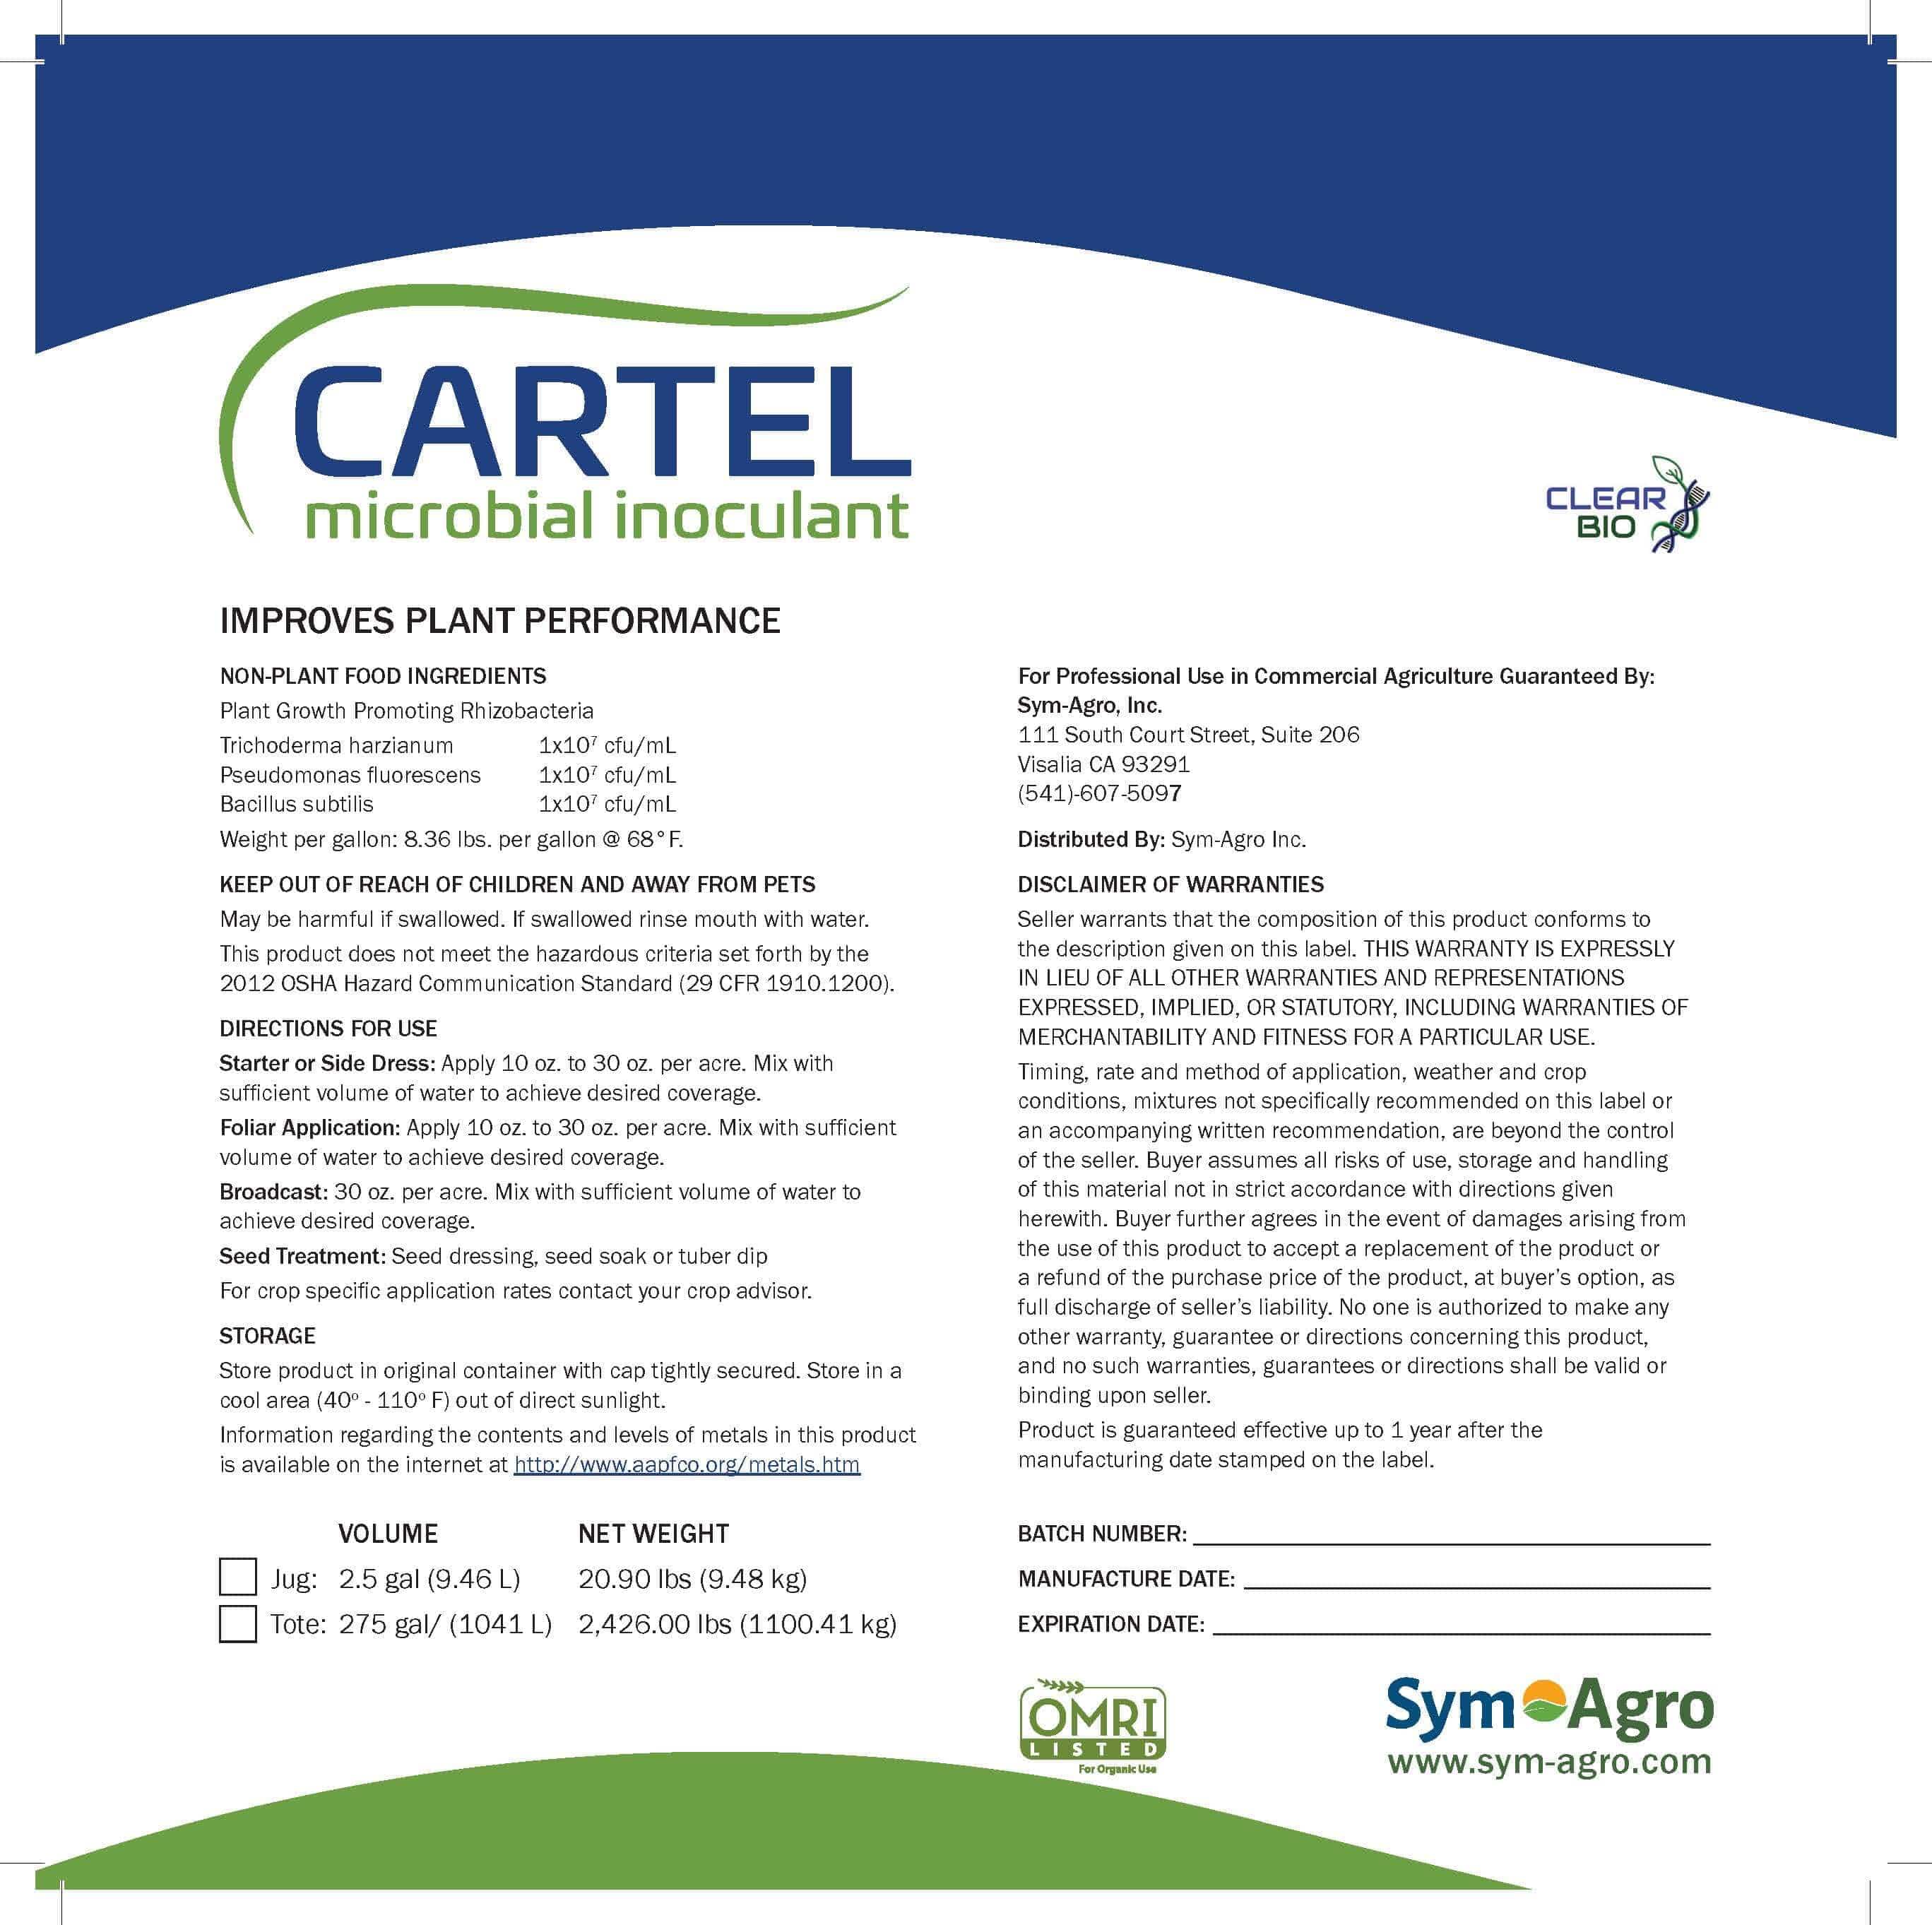 Apical Crop Science Microbial inoculants 2.5 gal Cartel Microbial Inoculant